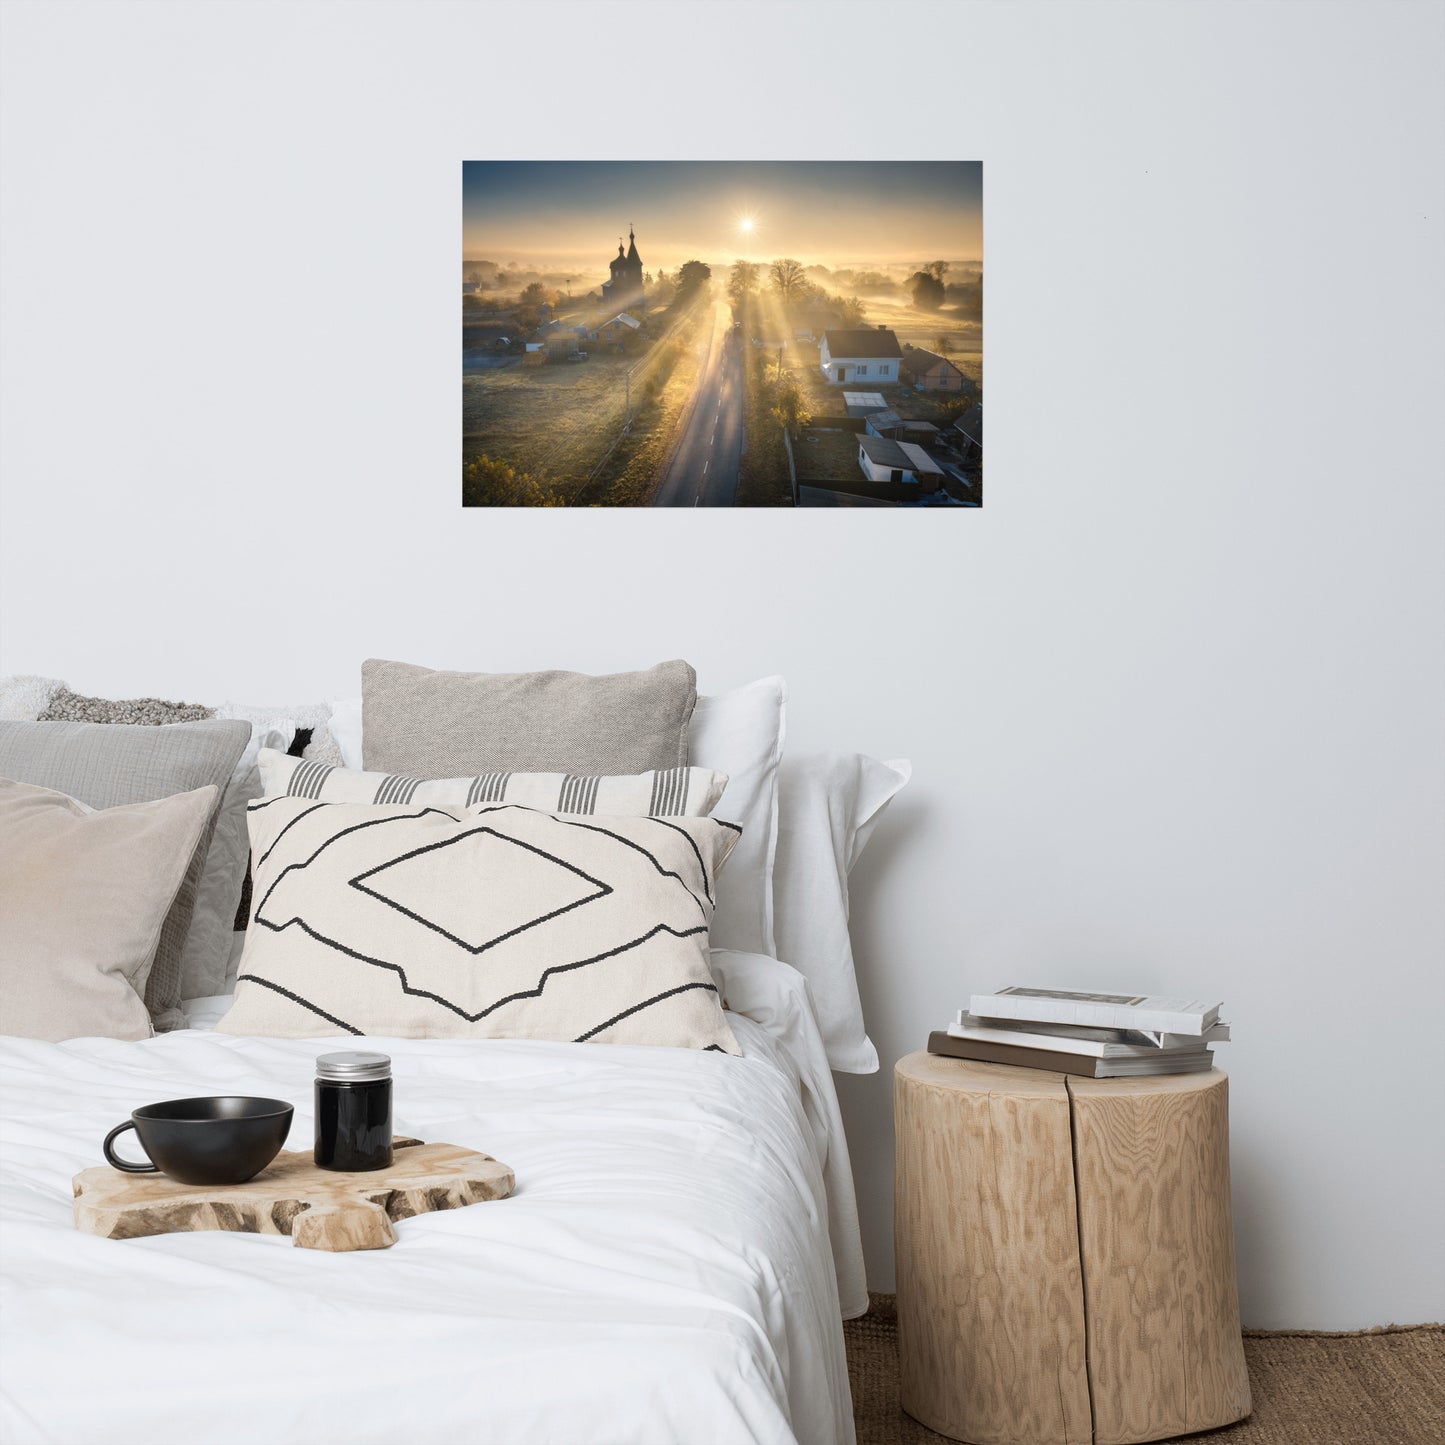 Misty Rural Town Sunrise in Autumn with Glory Rays Landscape Photo Loose Wall Art Prints